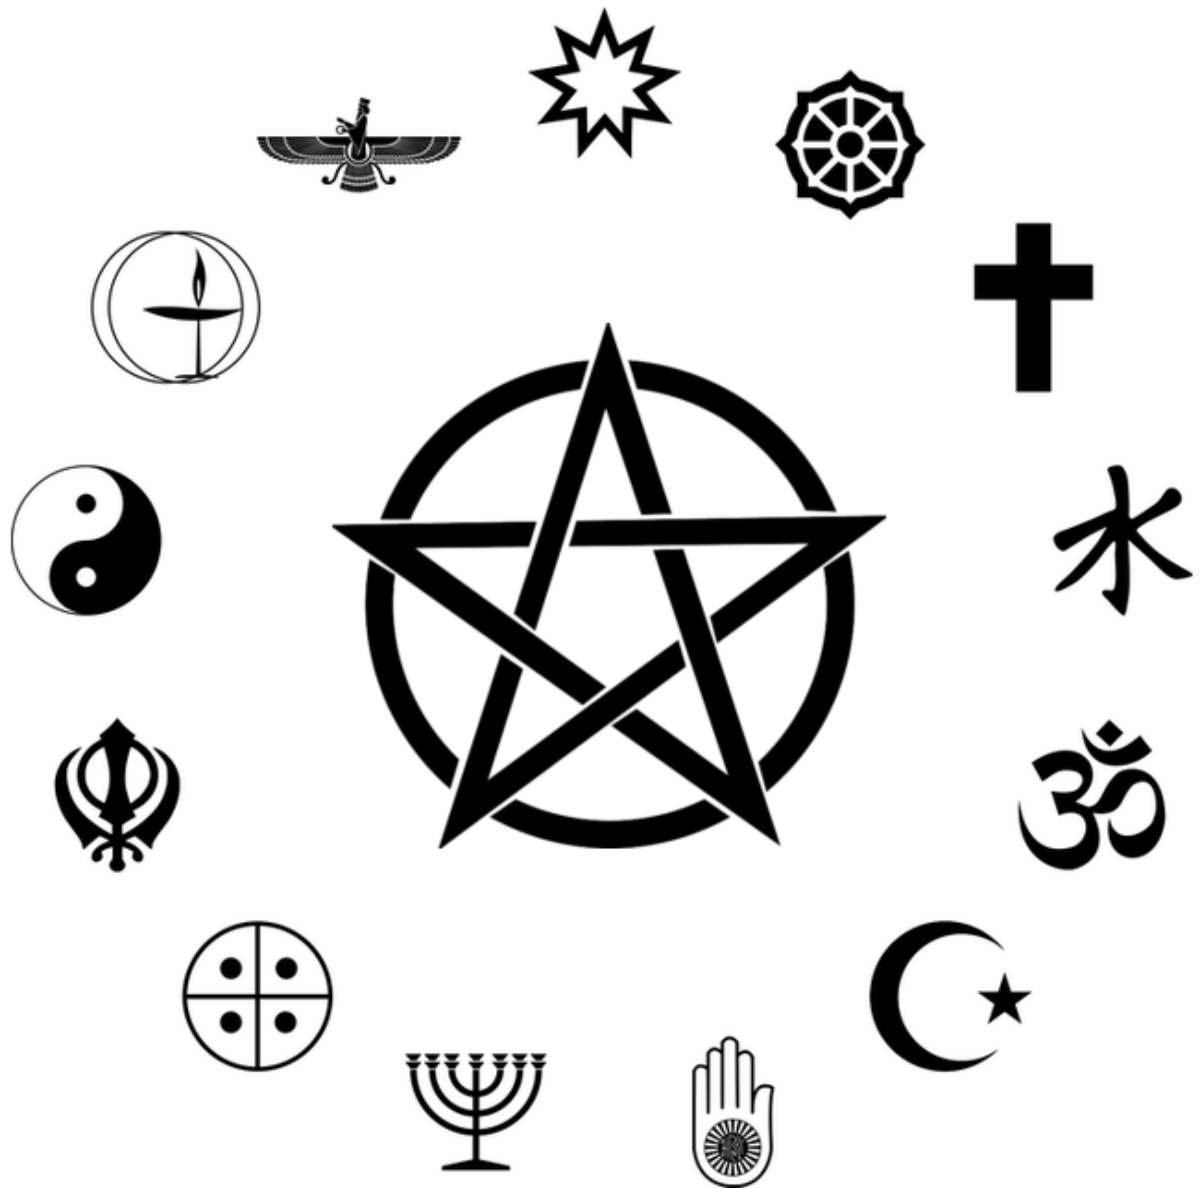 psychic symbols and their meanings